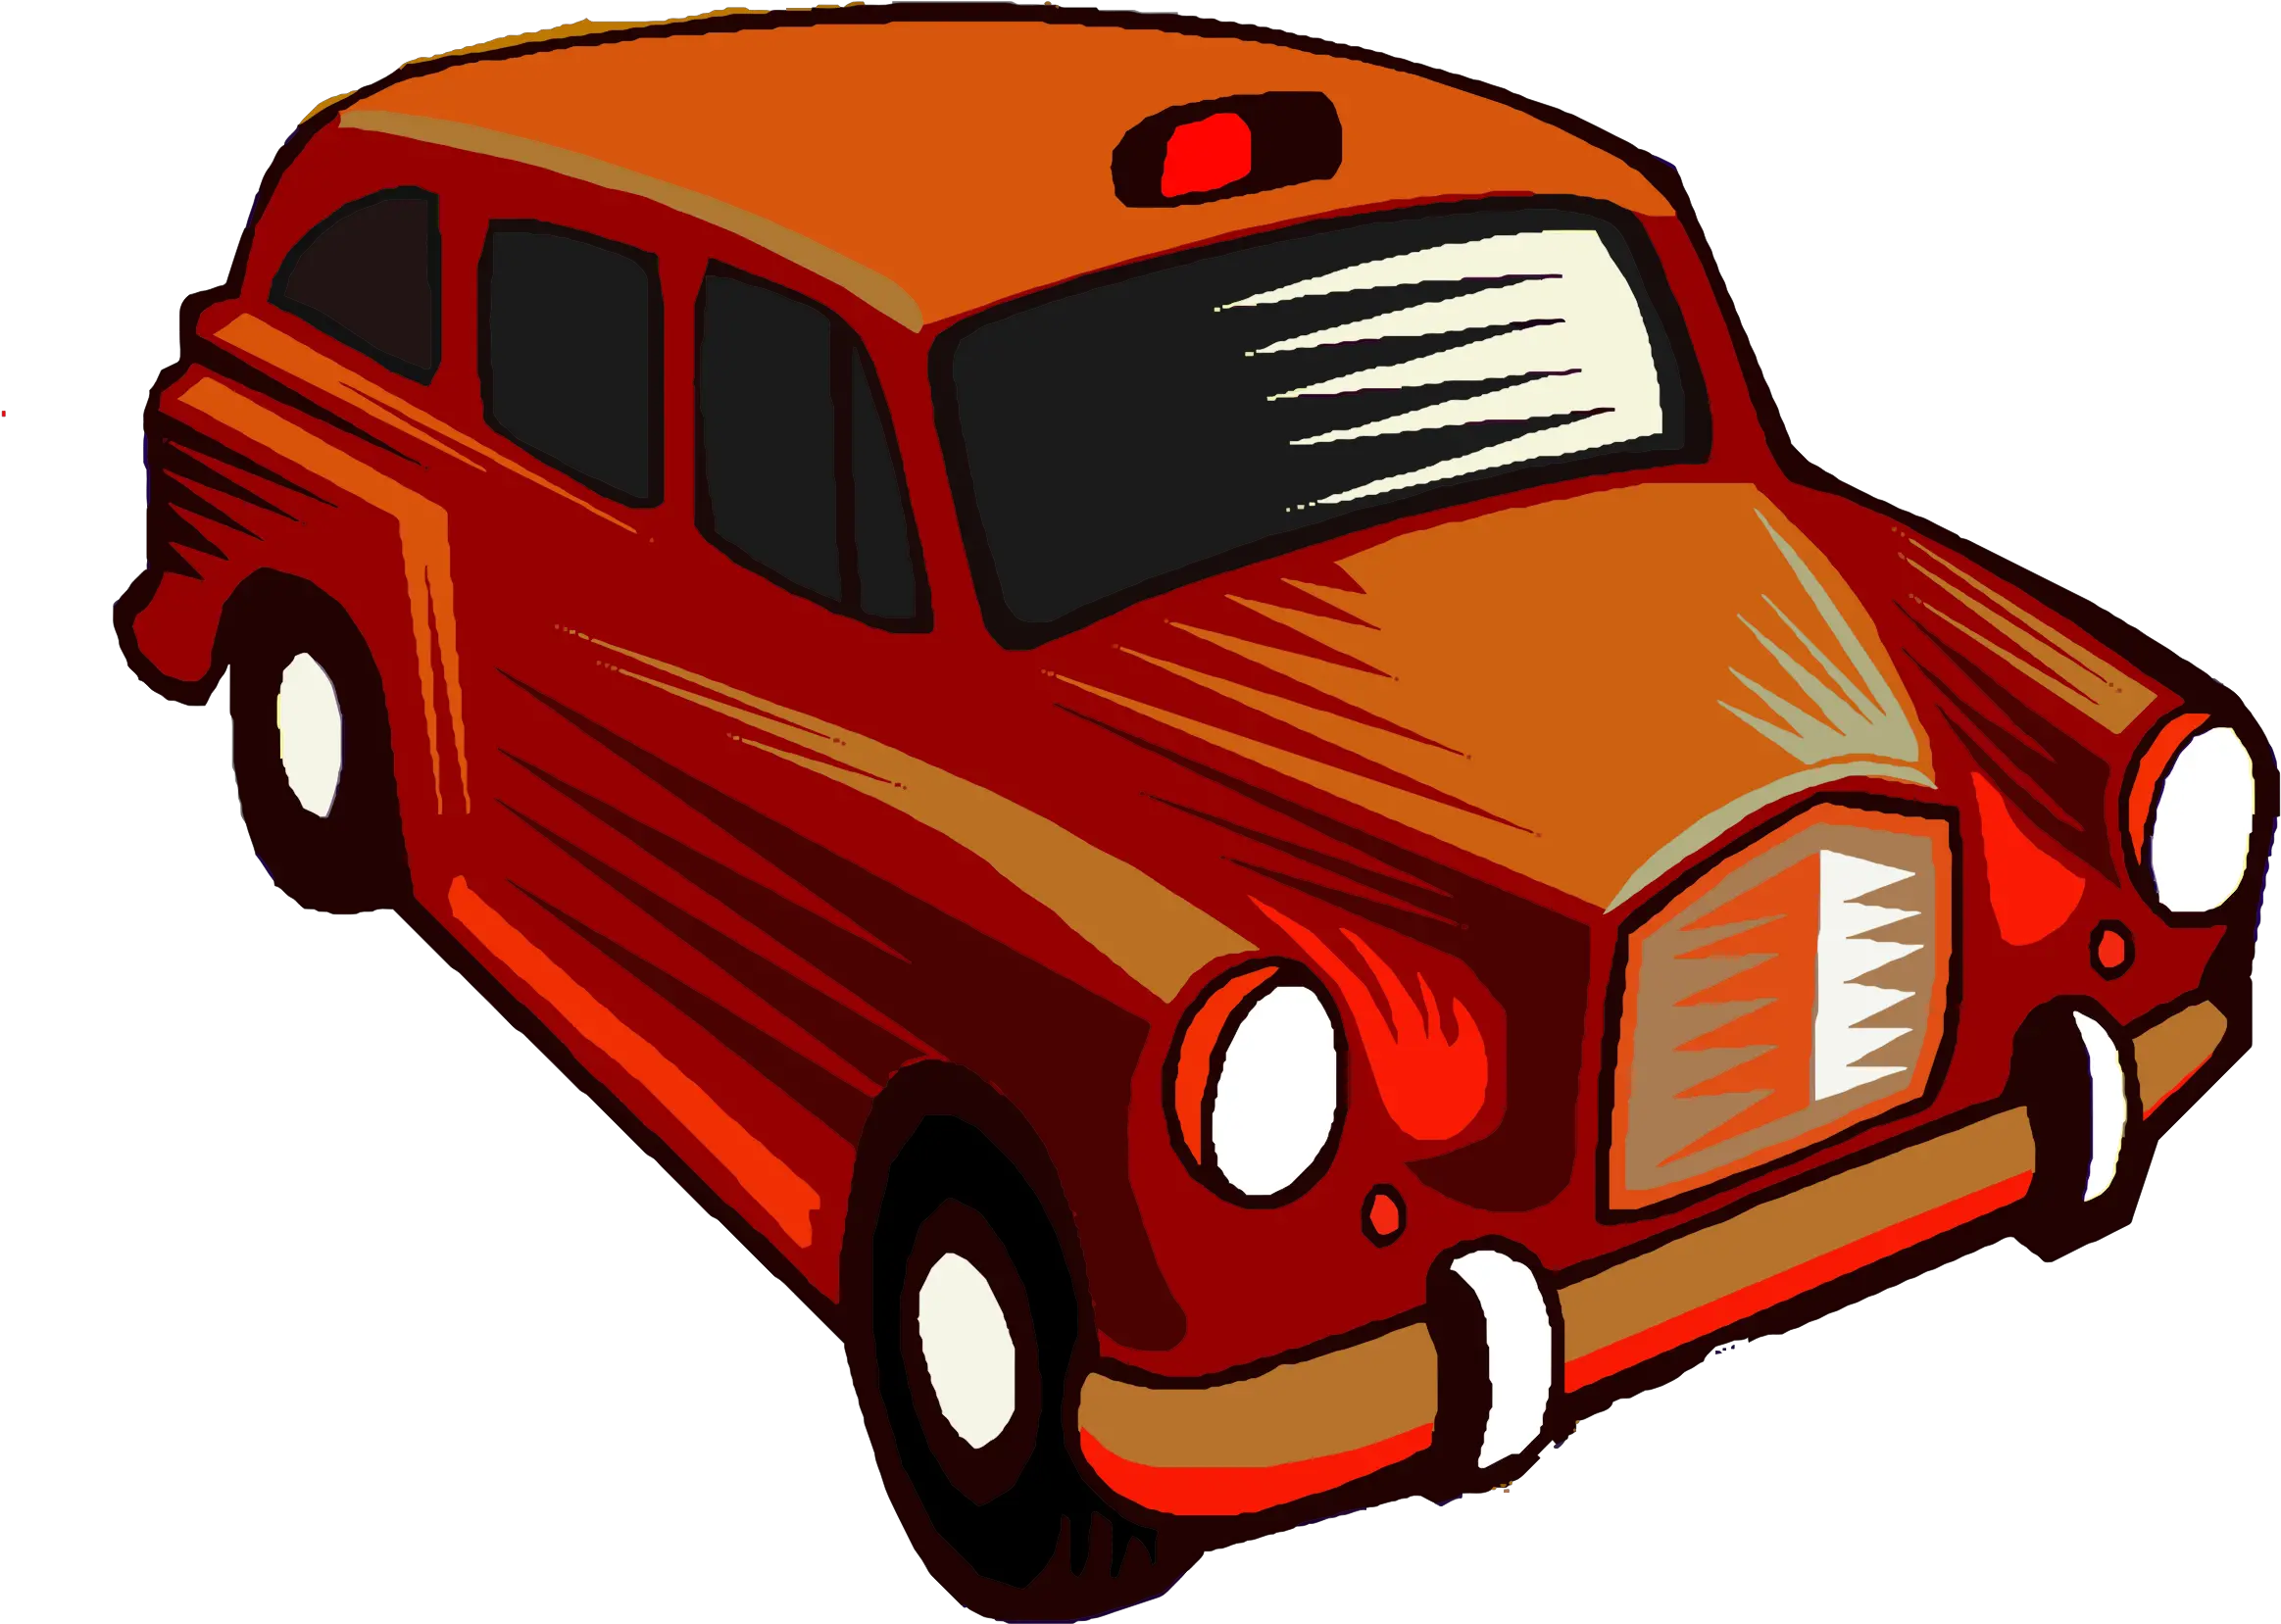 Download This Free Icons Png Design Of Red Taxi Cab Car Cartoon Taxi Cab Png